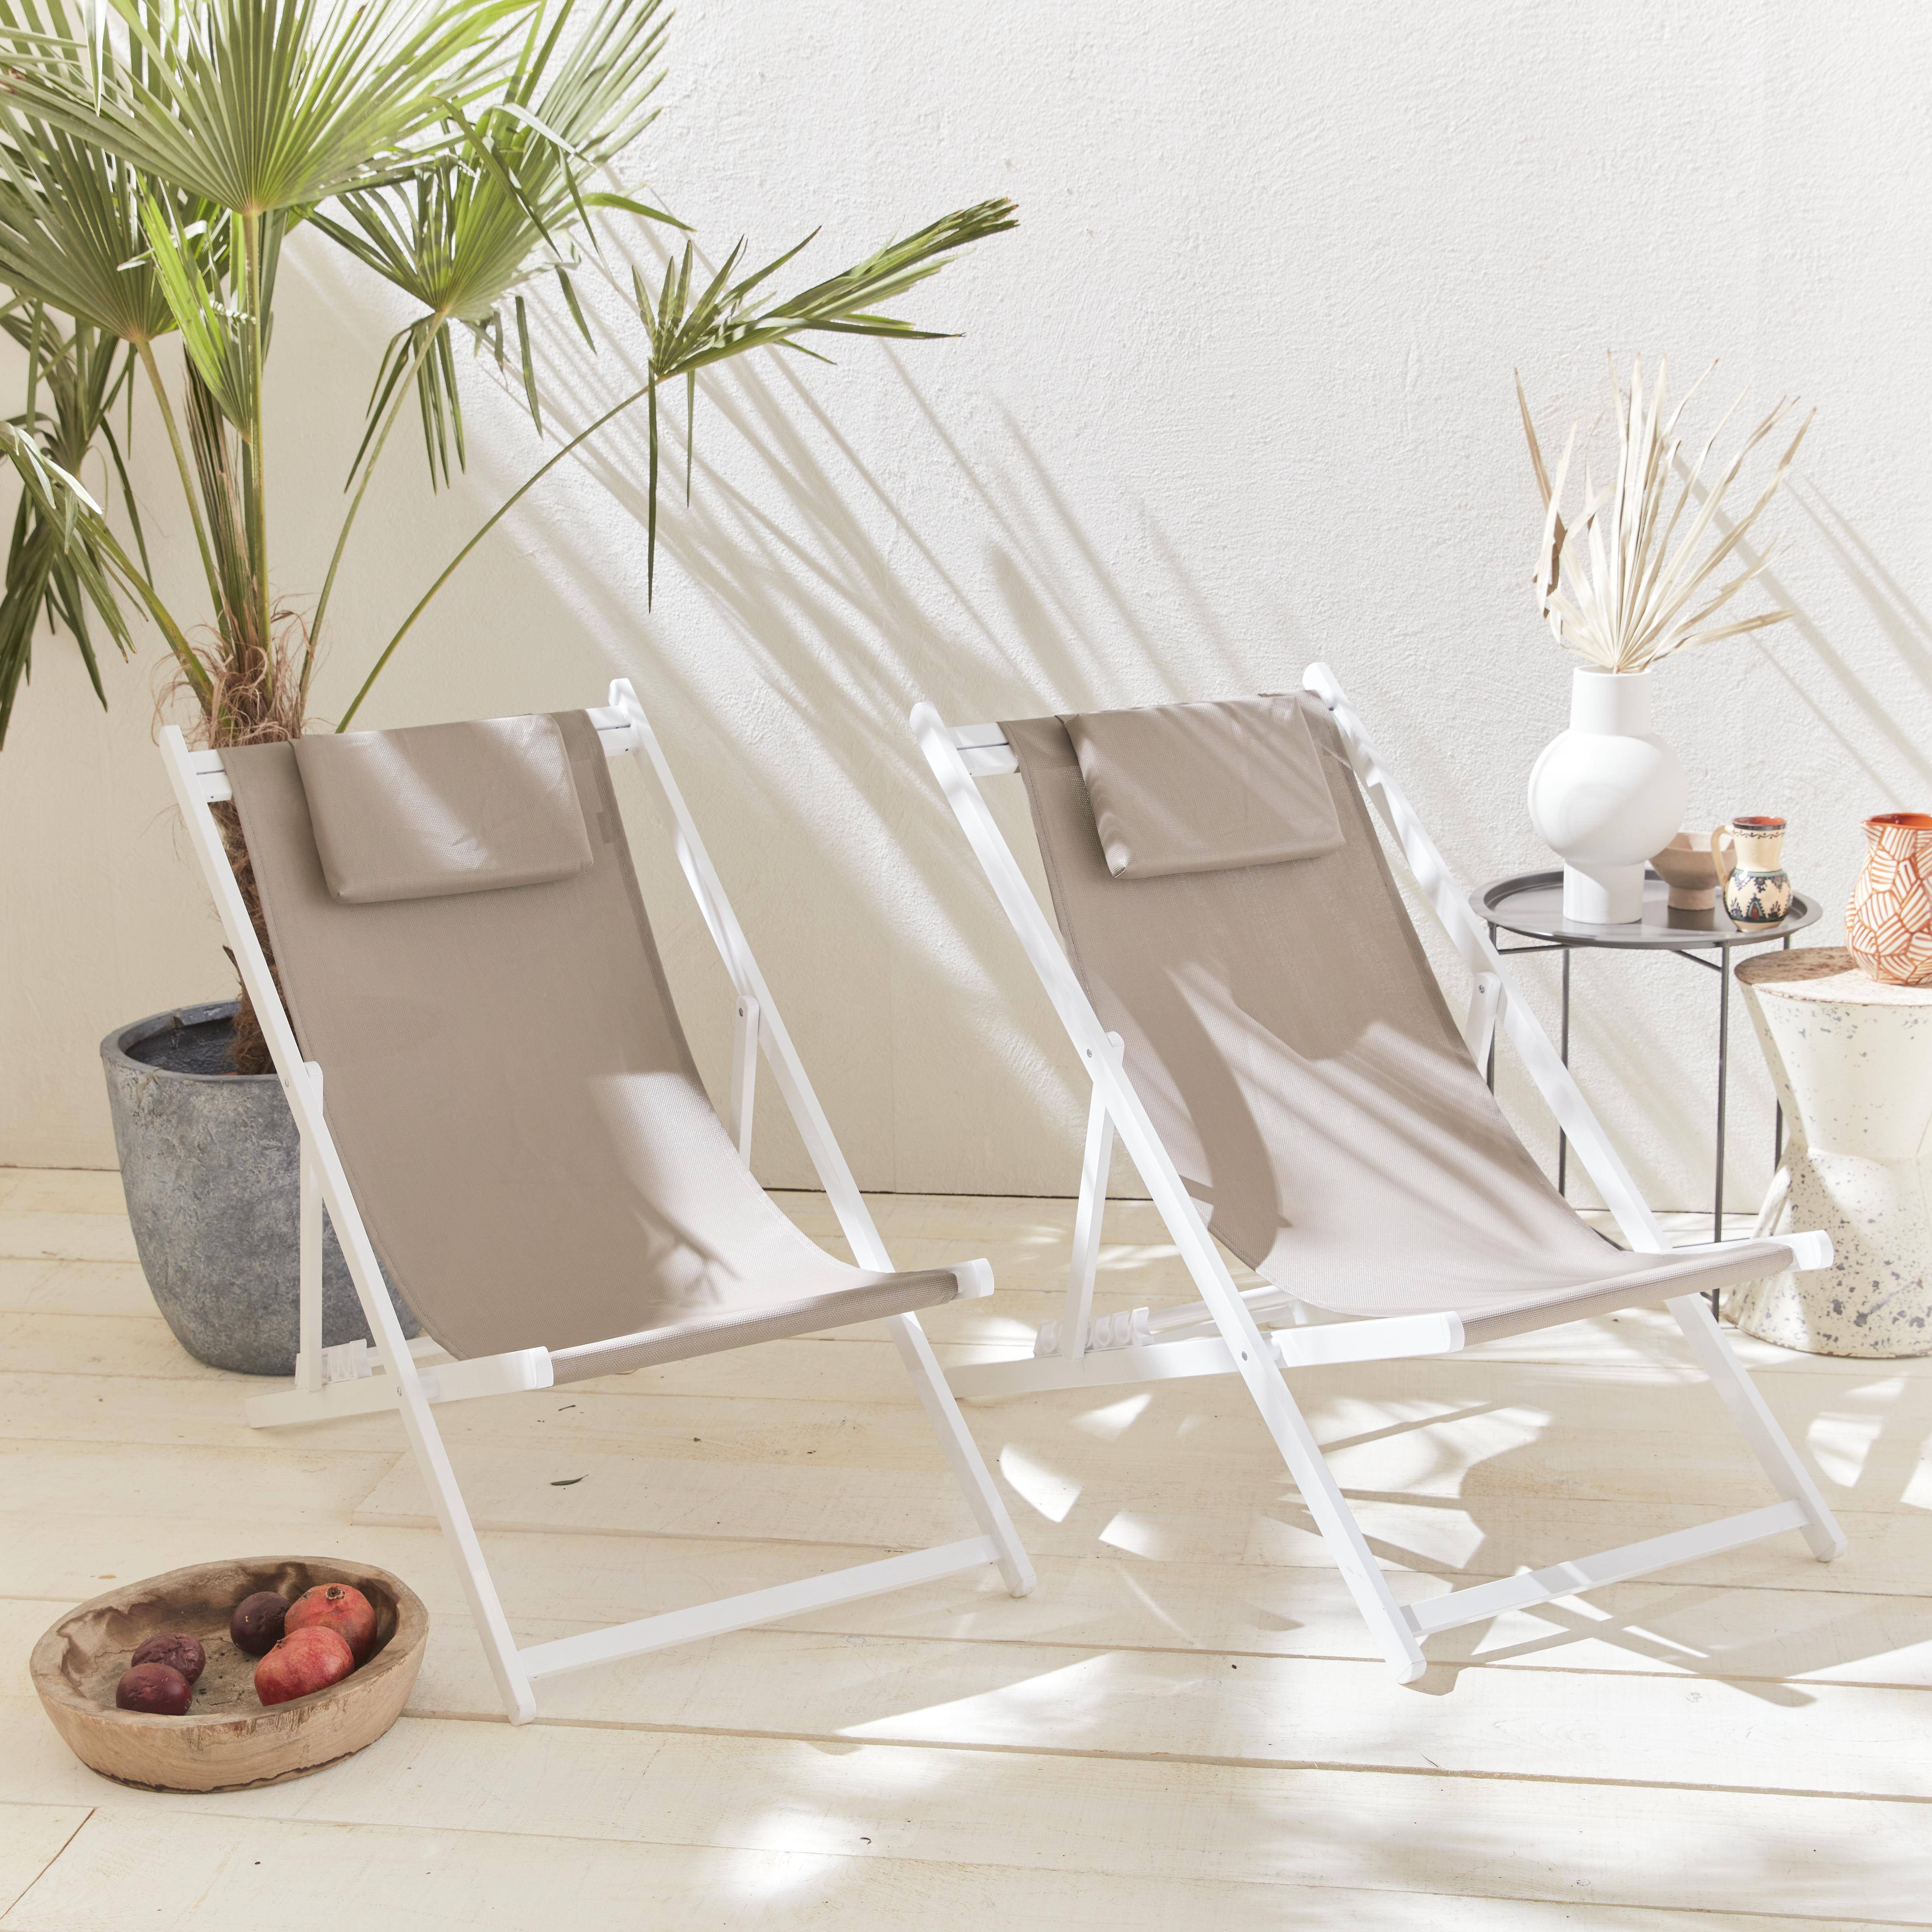 Set of 2 sun loungers - adjustable deck chairs with headrests made from aluminium frame - Gaia - White frame, Brown textilene Photo1